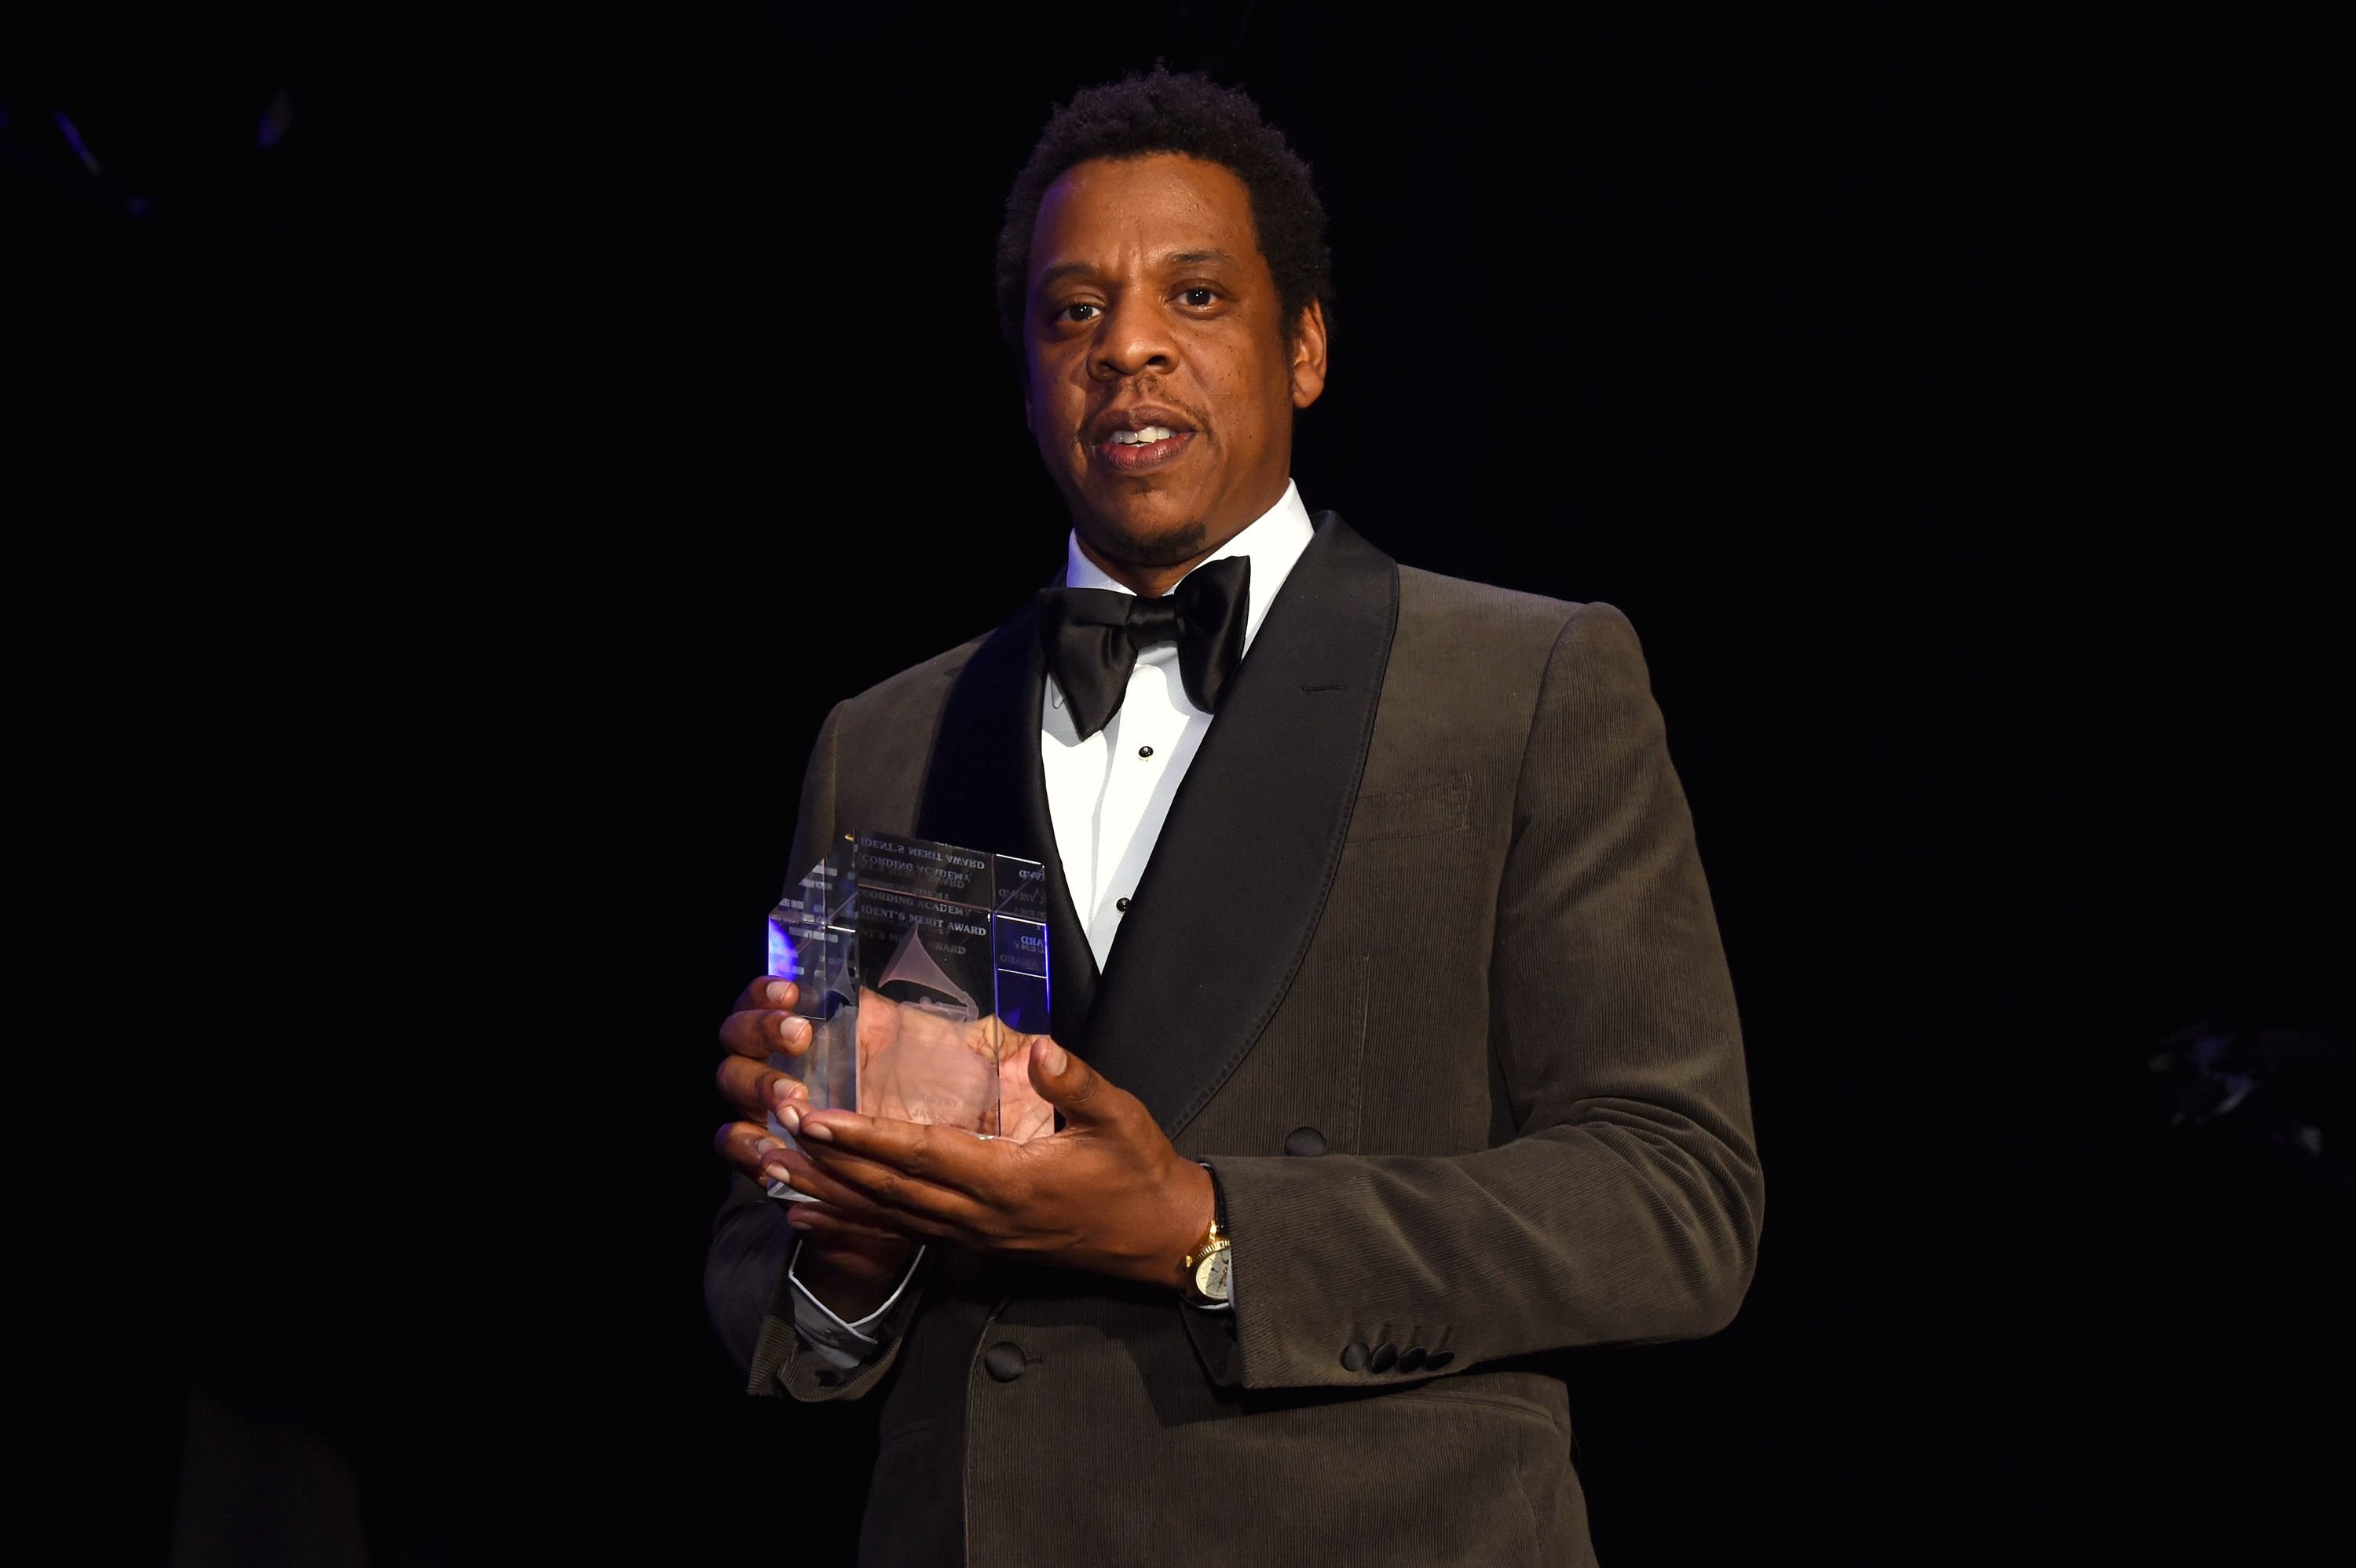 Jay-Z accepts the President's Merit Award onstage during the Clive Davis and Recording Academy Pre-GRAMMY Gala and GRAMMY Salute to Industry Icons Honoring Jay-Z on January 27, 2018 in New York City. | Source: Getty Images